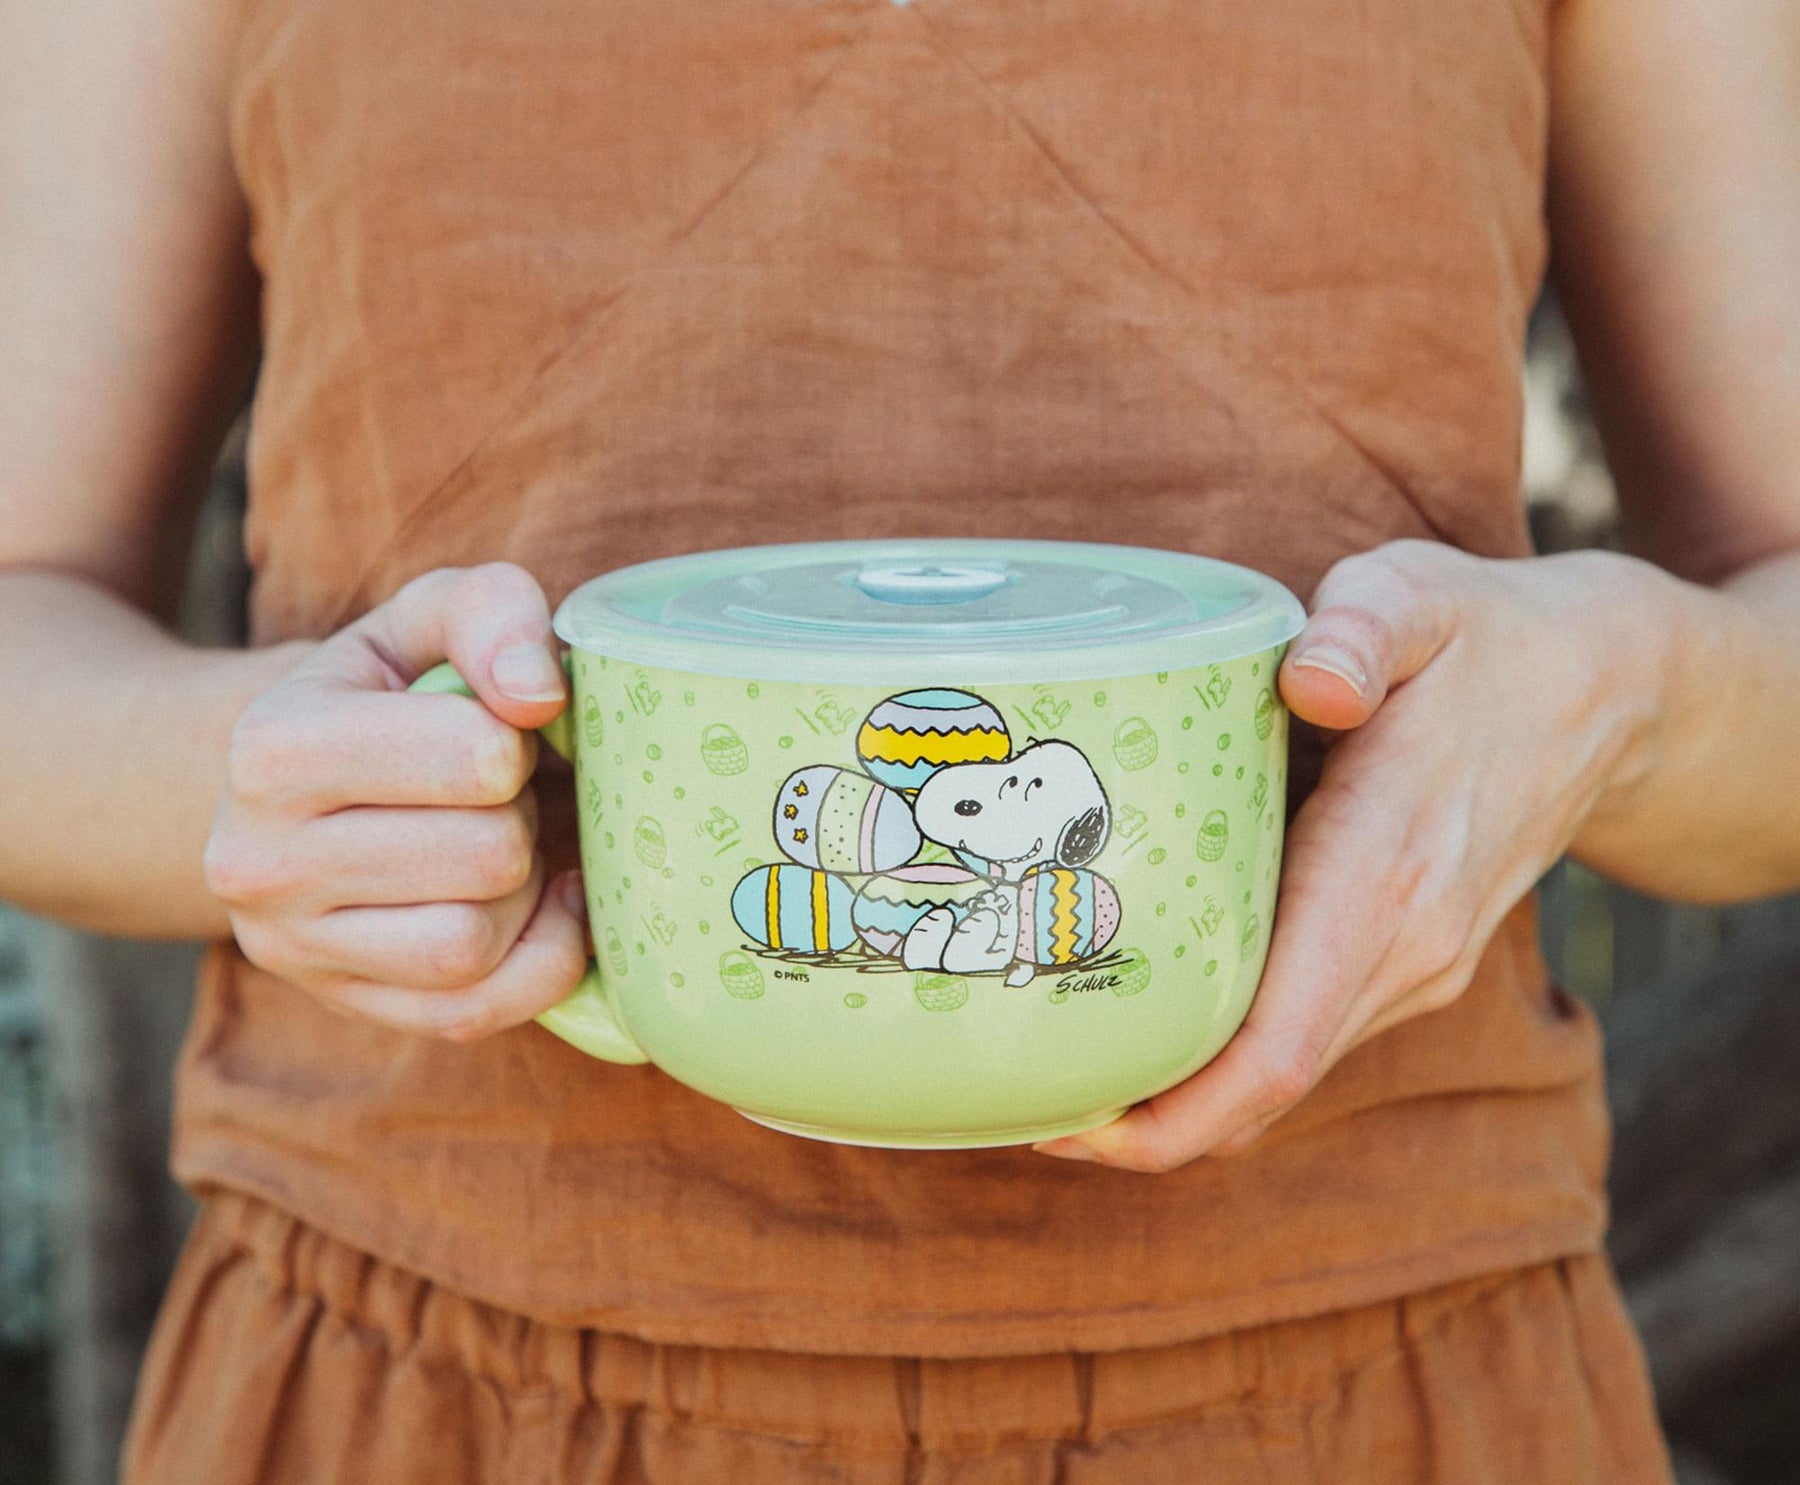 Peanuts Snoopy Easter Pastel Green Soup Mug With Vented Lid | Holds 24 Ounces